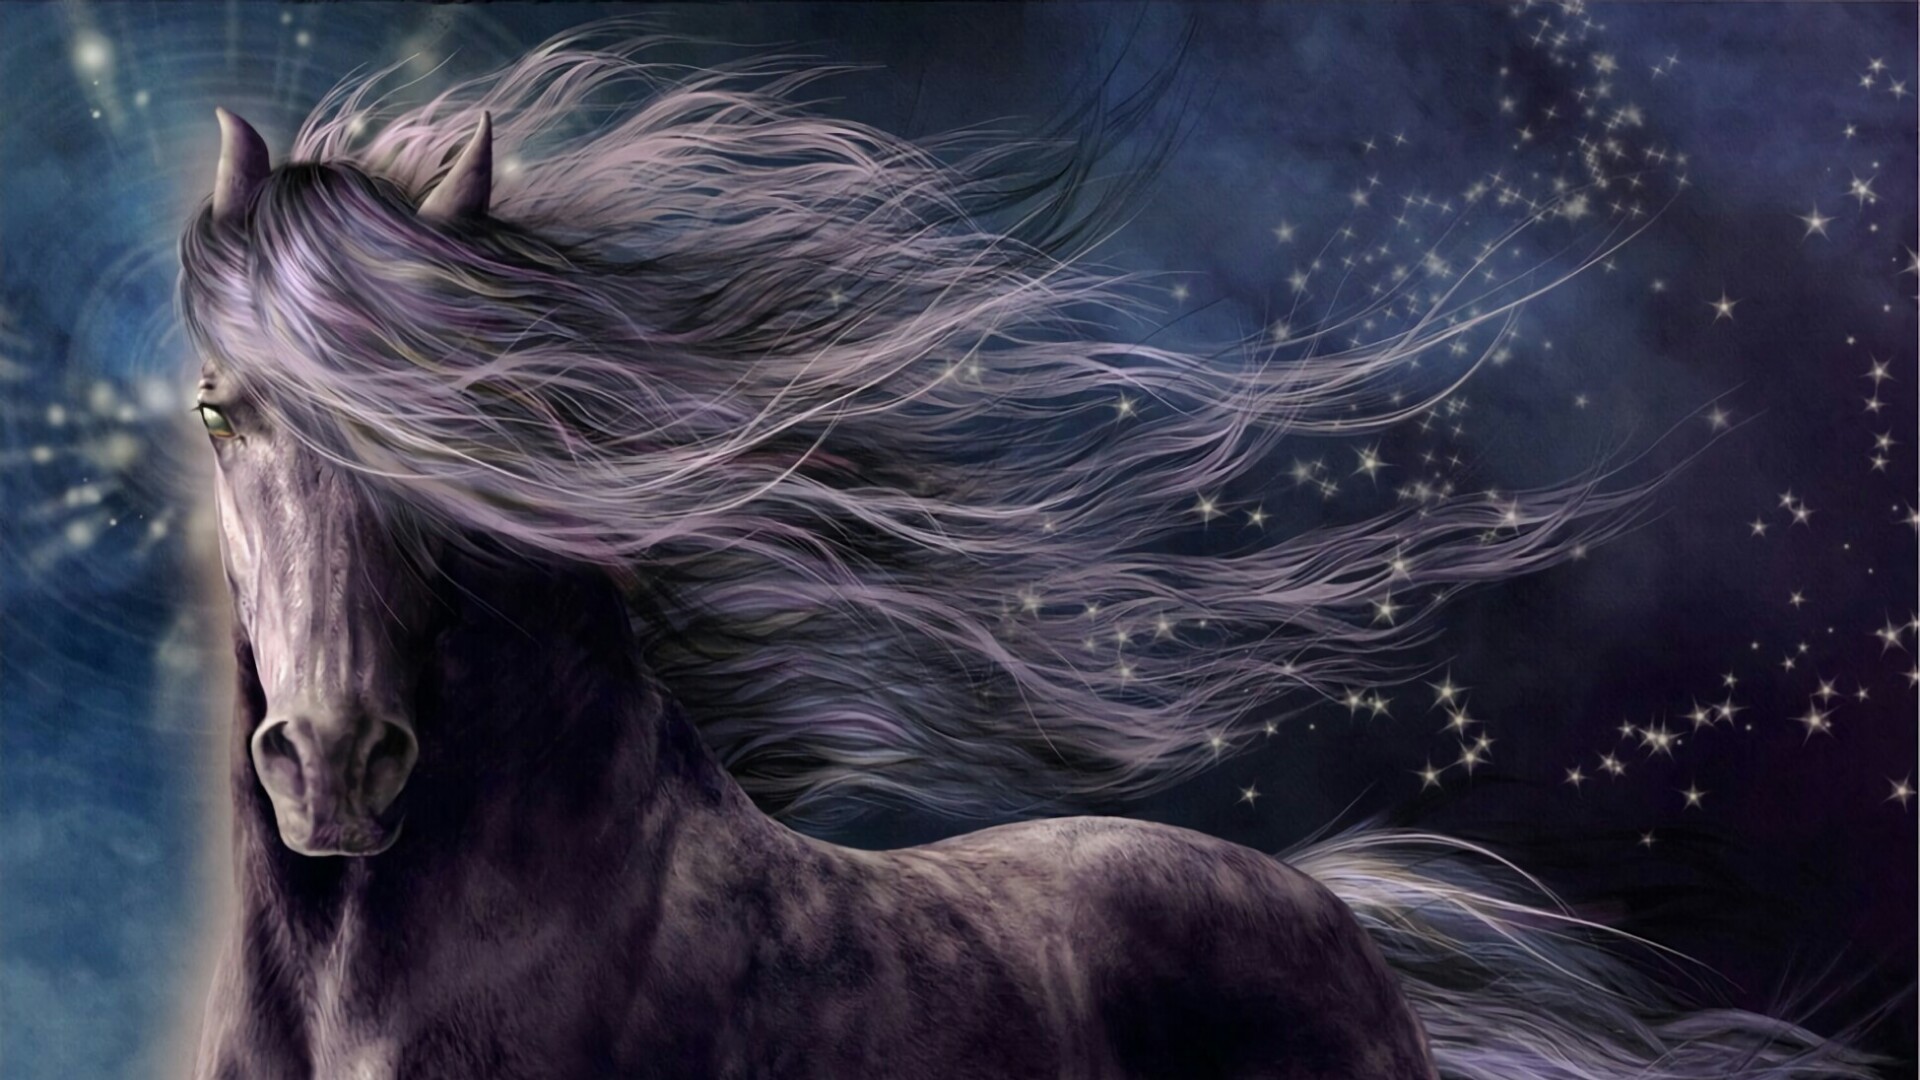 1920x1080 dreamy horse with stars fantasy art hd wallpaper Moving Dragon Wallpapers  for Desktop Moving Dragon Wallpapers for Desktop